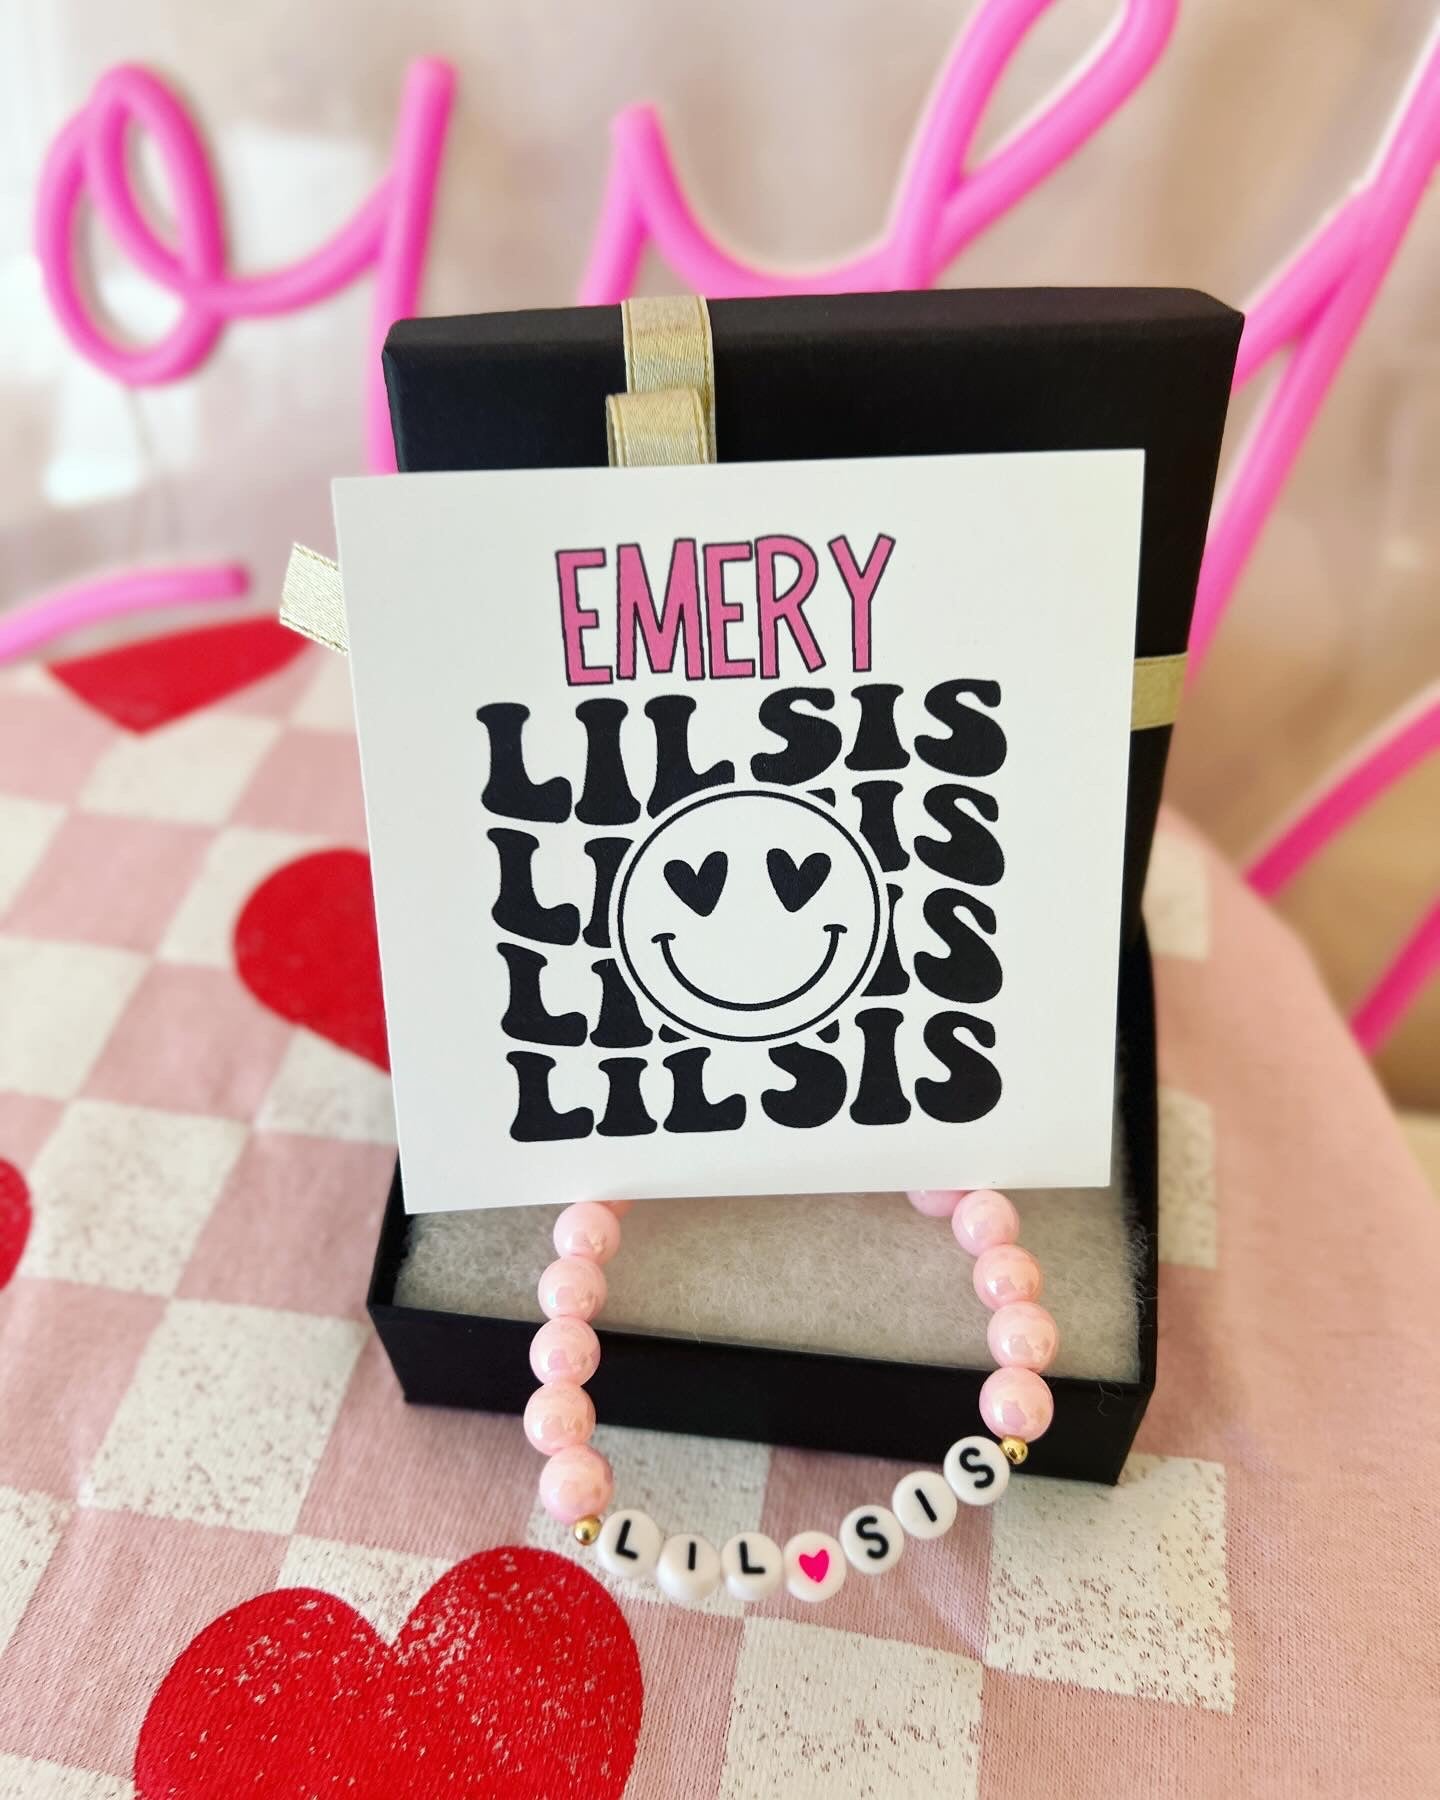 Big Sis or Little Sis Bracelet & smile card, with box & ribbon included!